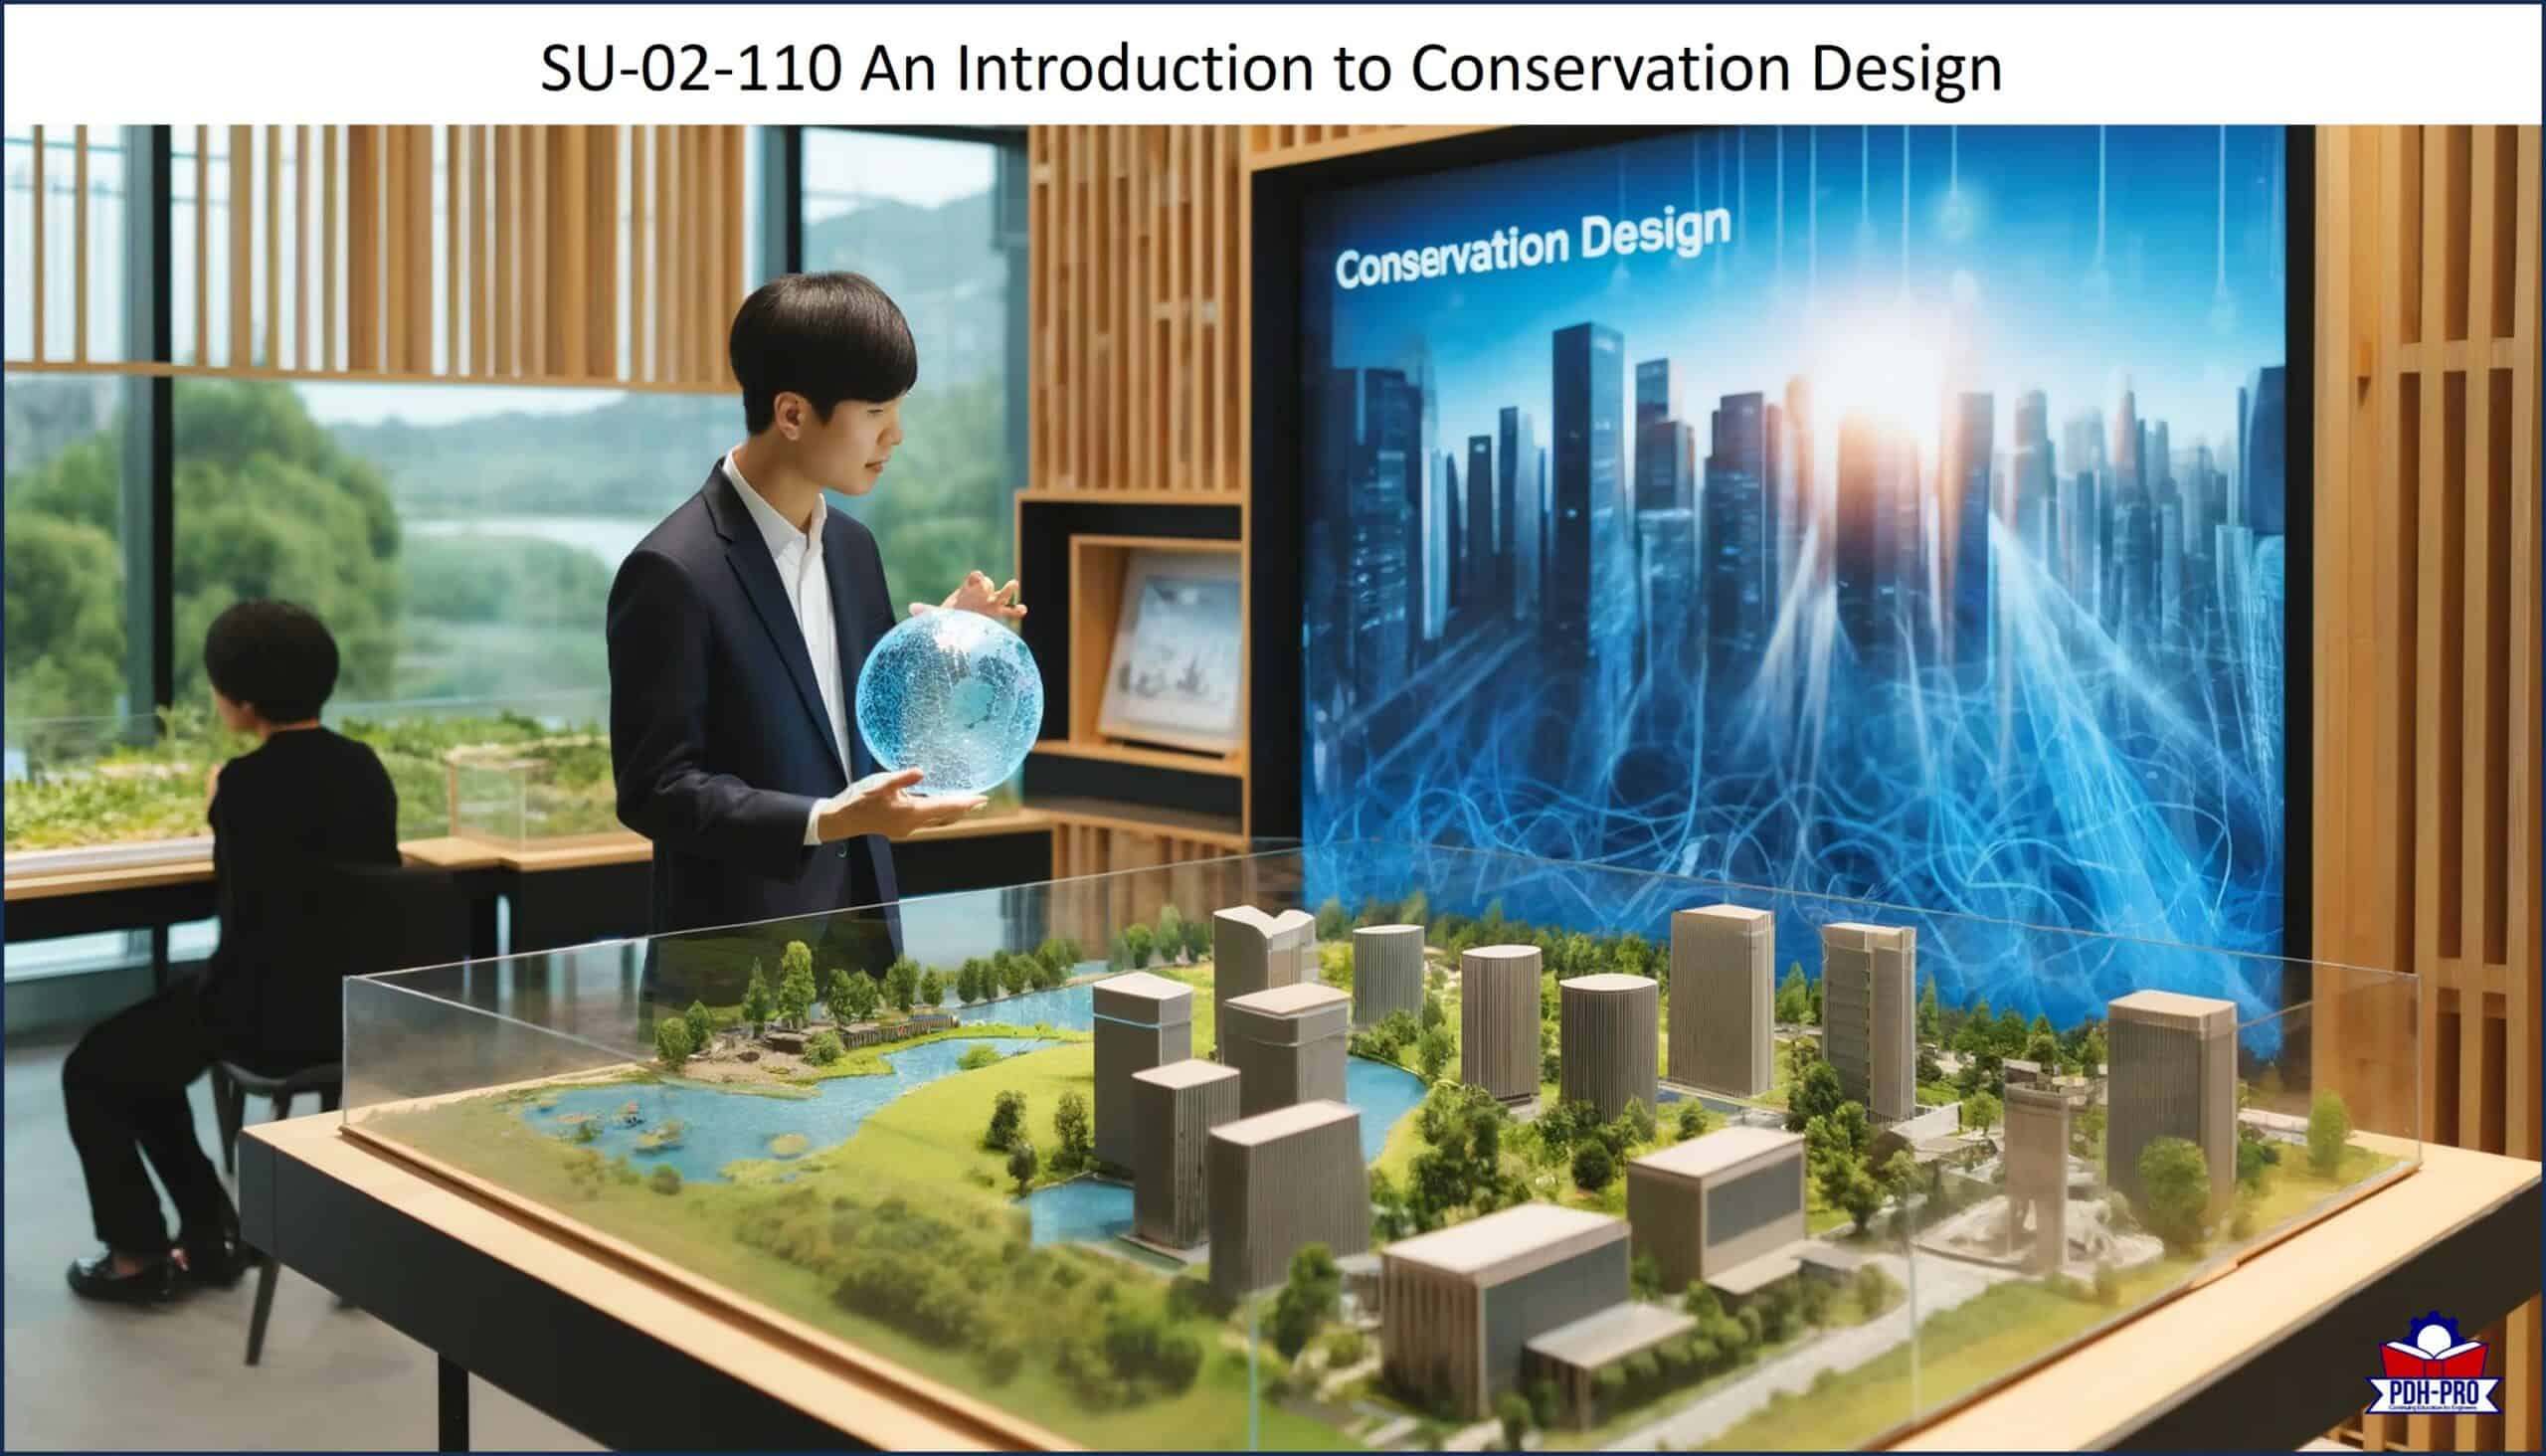 An Introduction to Conservation Design